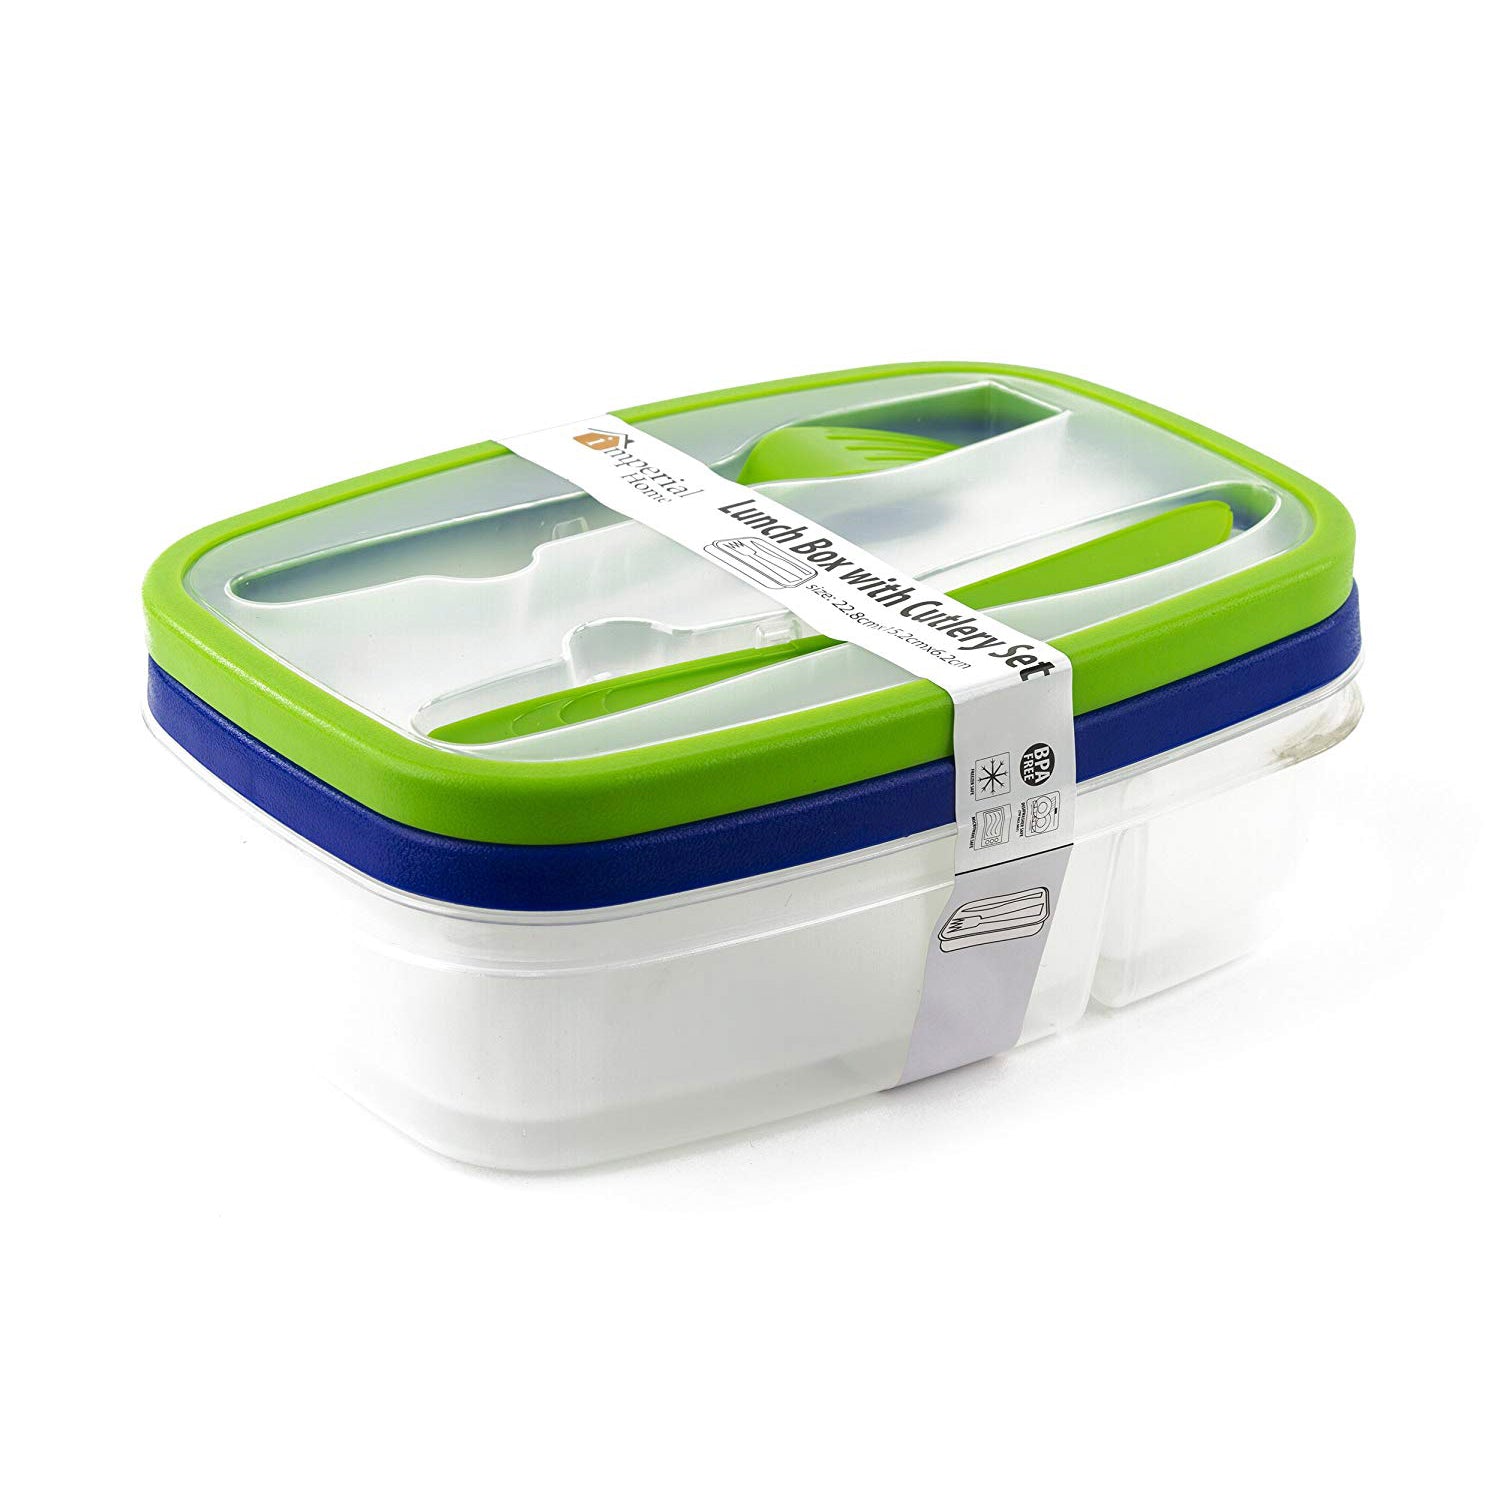 Plastic Bento Lunch Box - Food Storage Containers with Cutlery